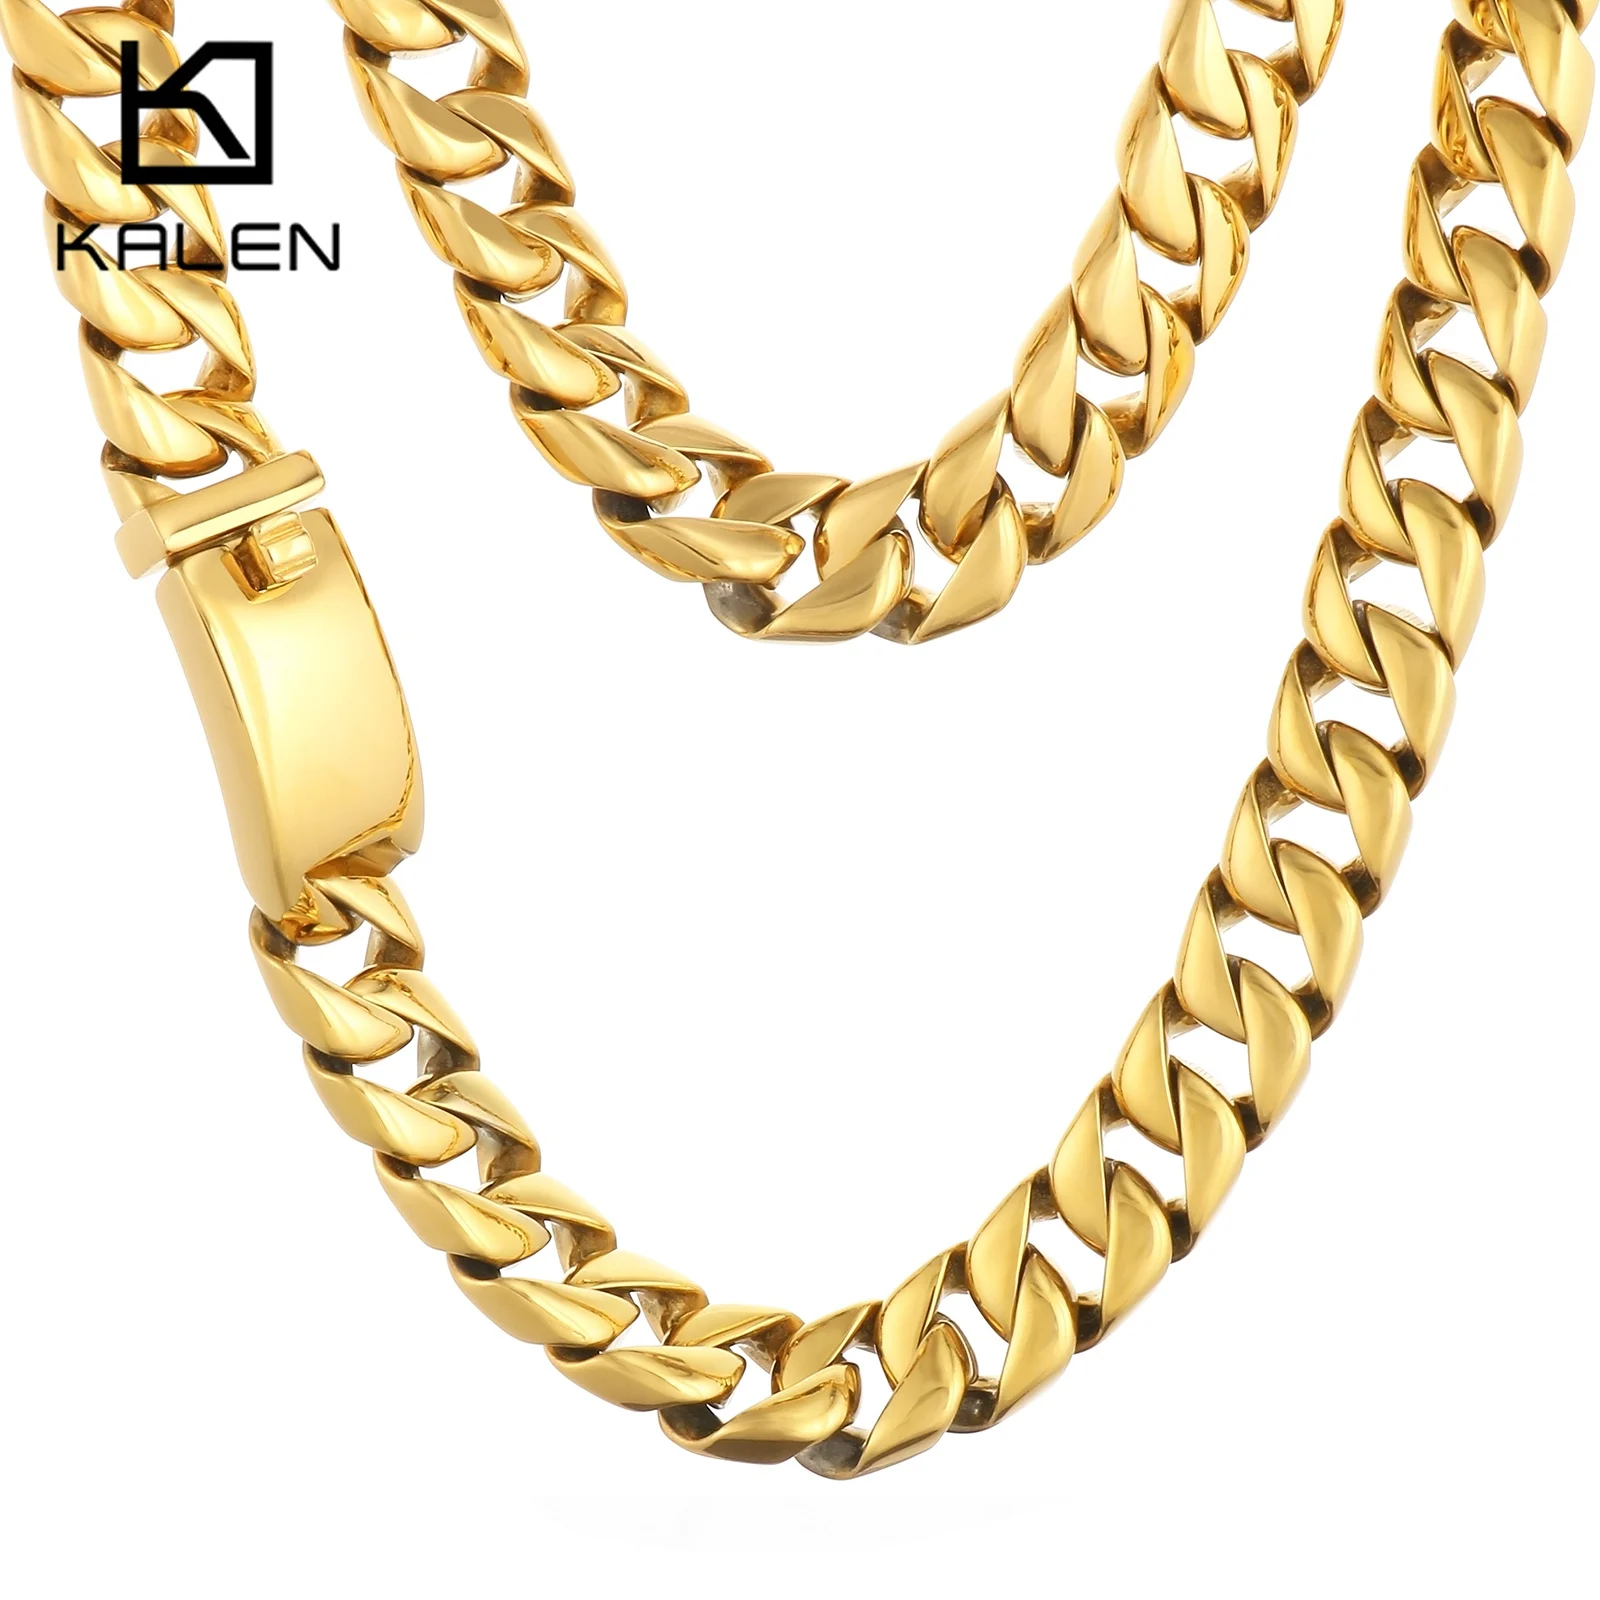 

12mm Shiny Cuban Chain Bracelet & Necklace Jewelry Set - Stainless Steel 316L - Silver/Gold Color - KB23389-D